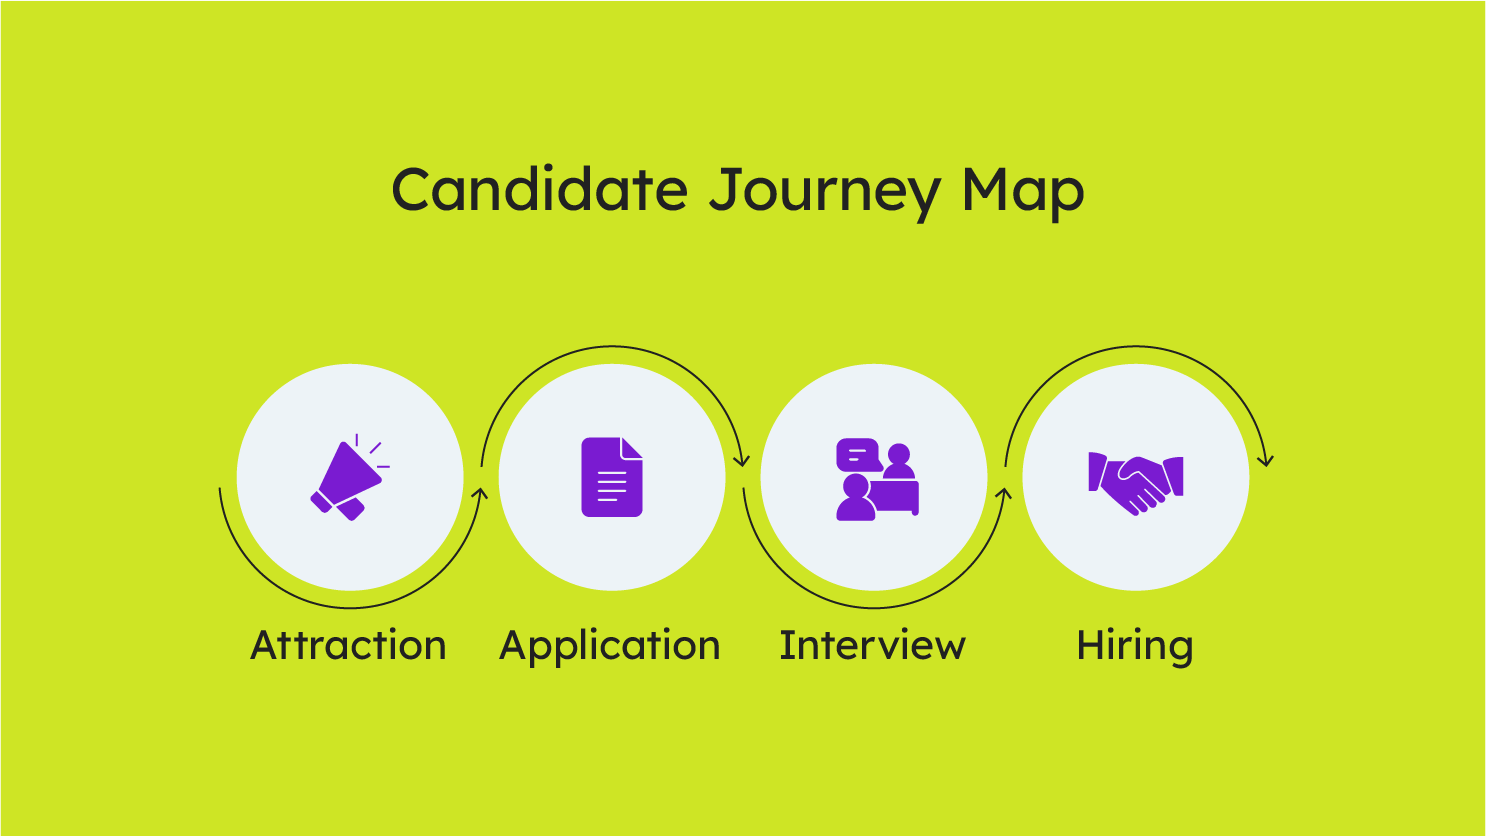 Candidate journey map